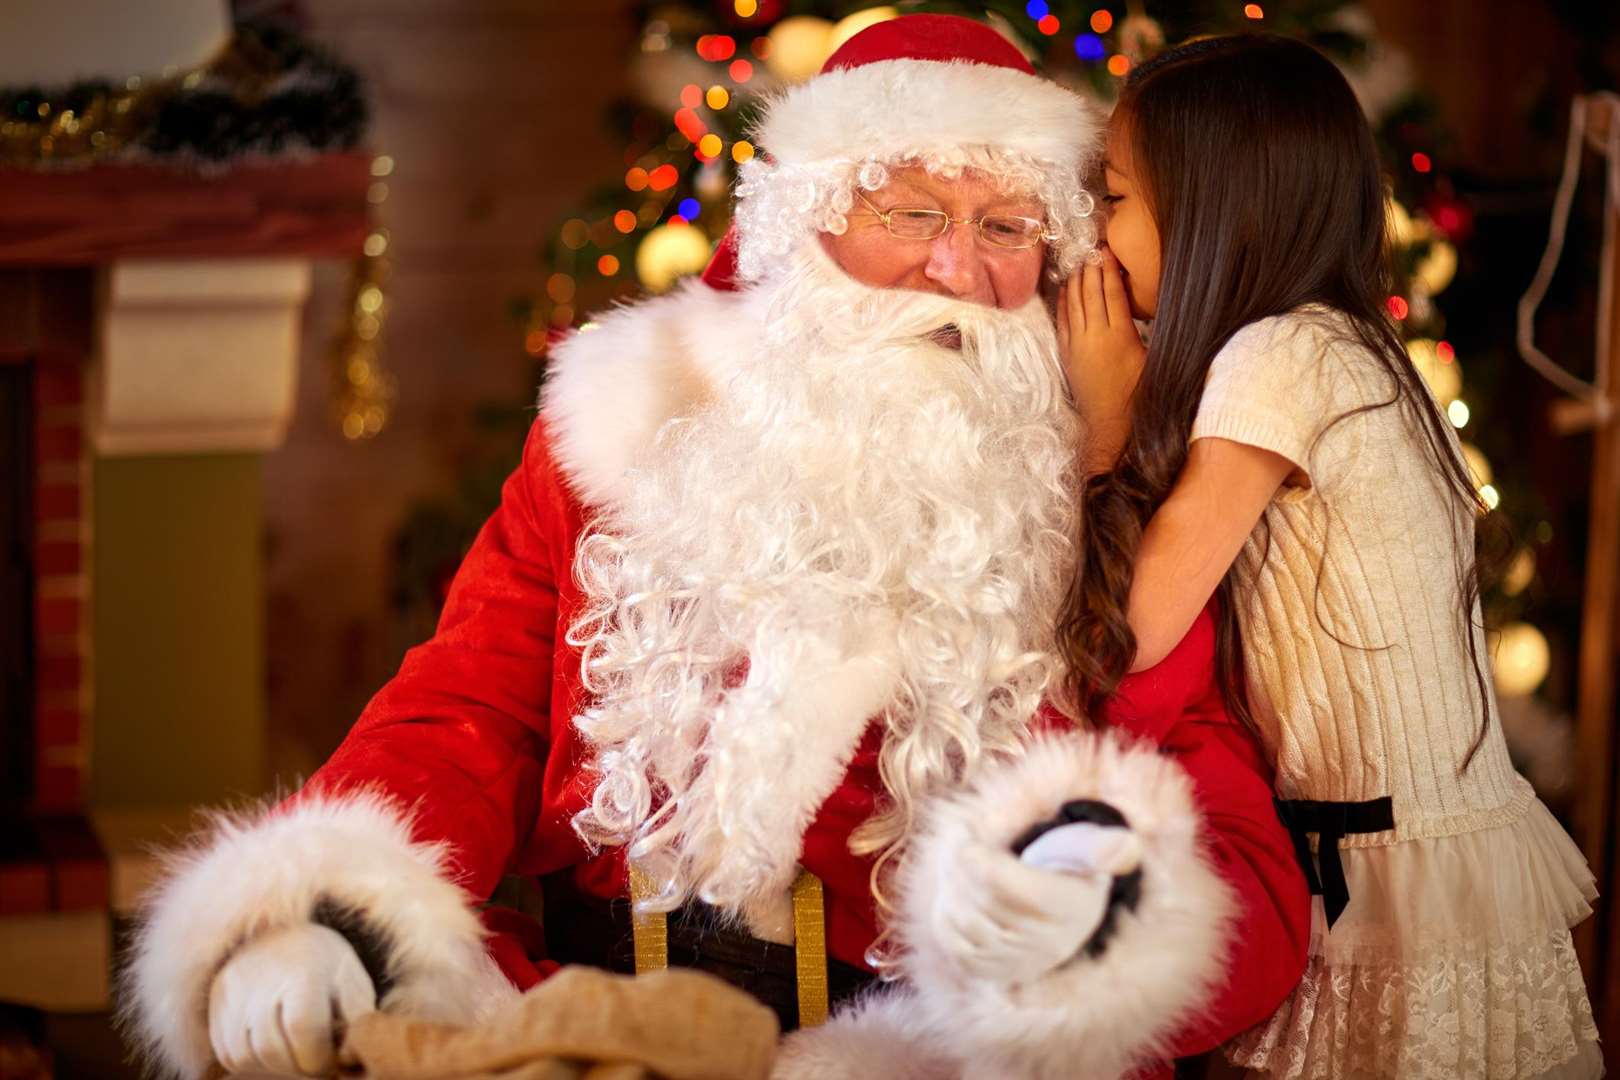 Santa Claus will be on board P&O Ferries in the run up to Christmas